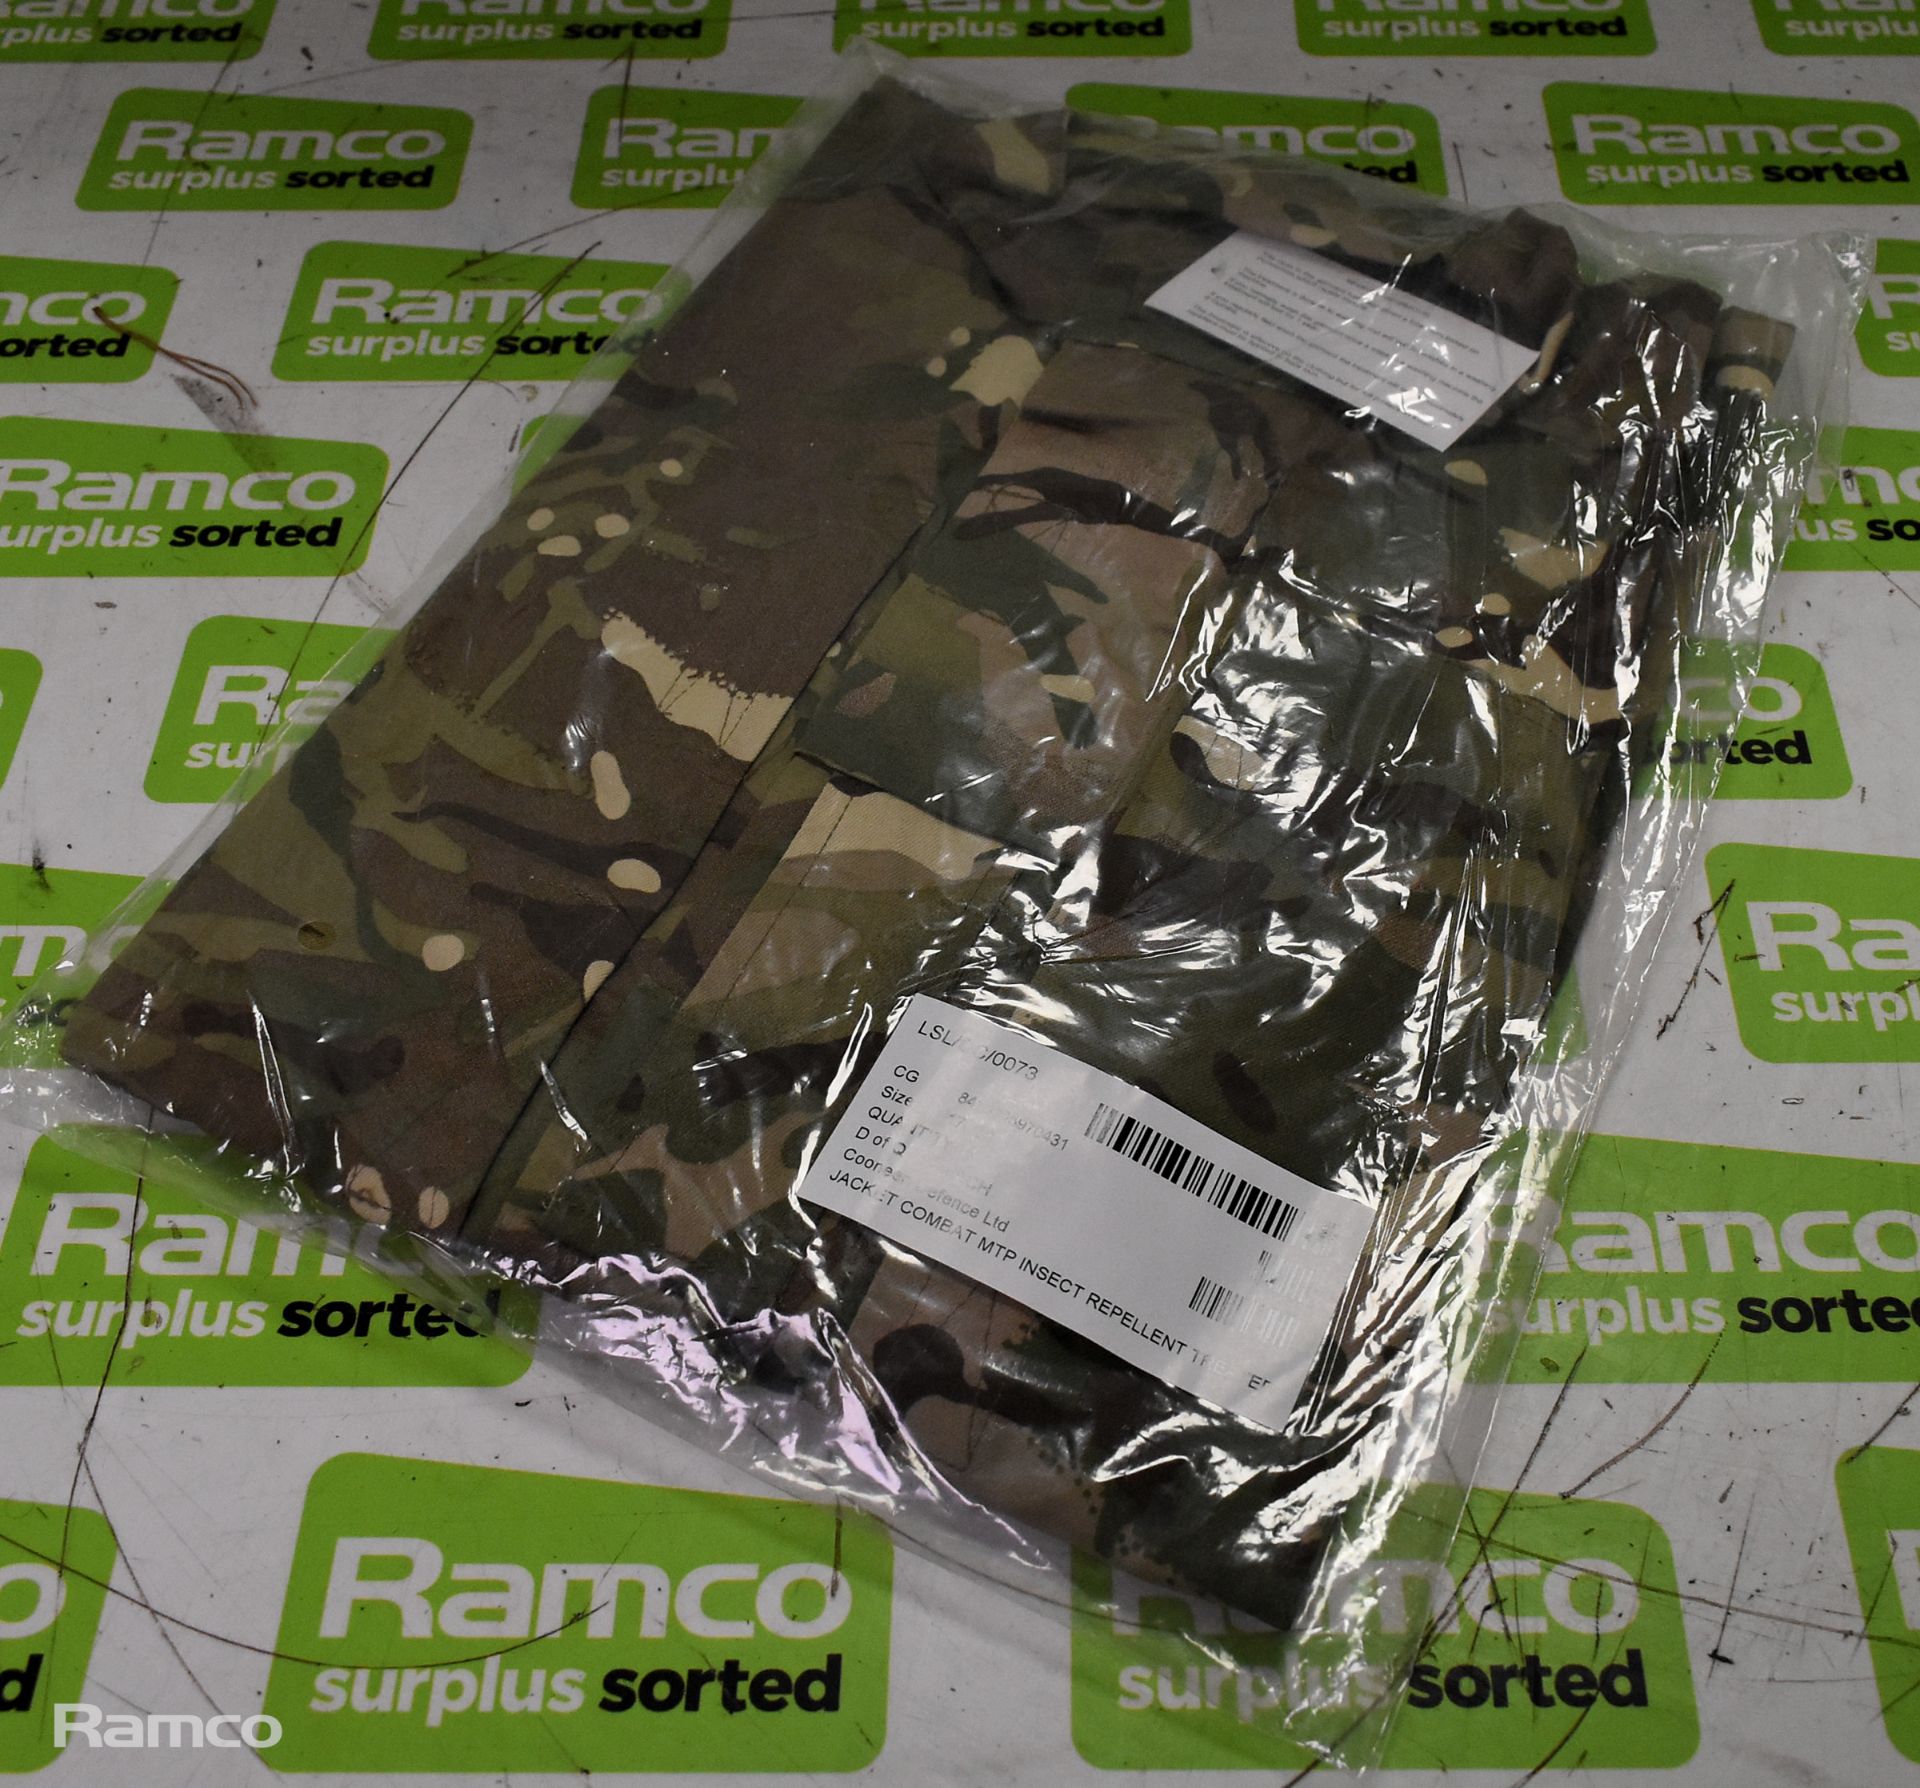 12x British Army MTP combat jackets - new / packaged - Image 8 of 13